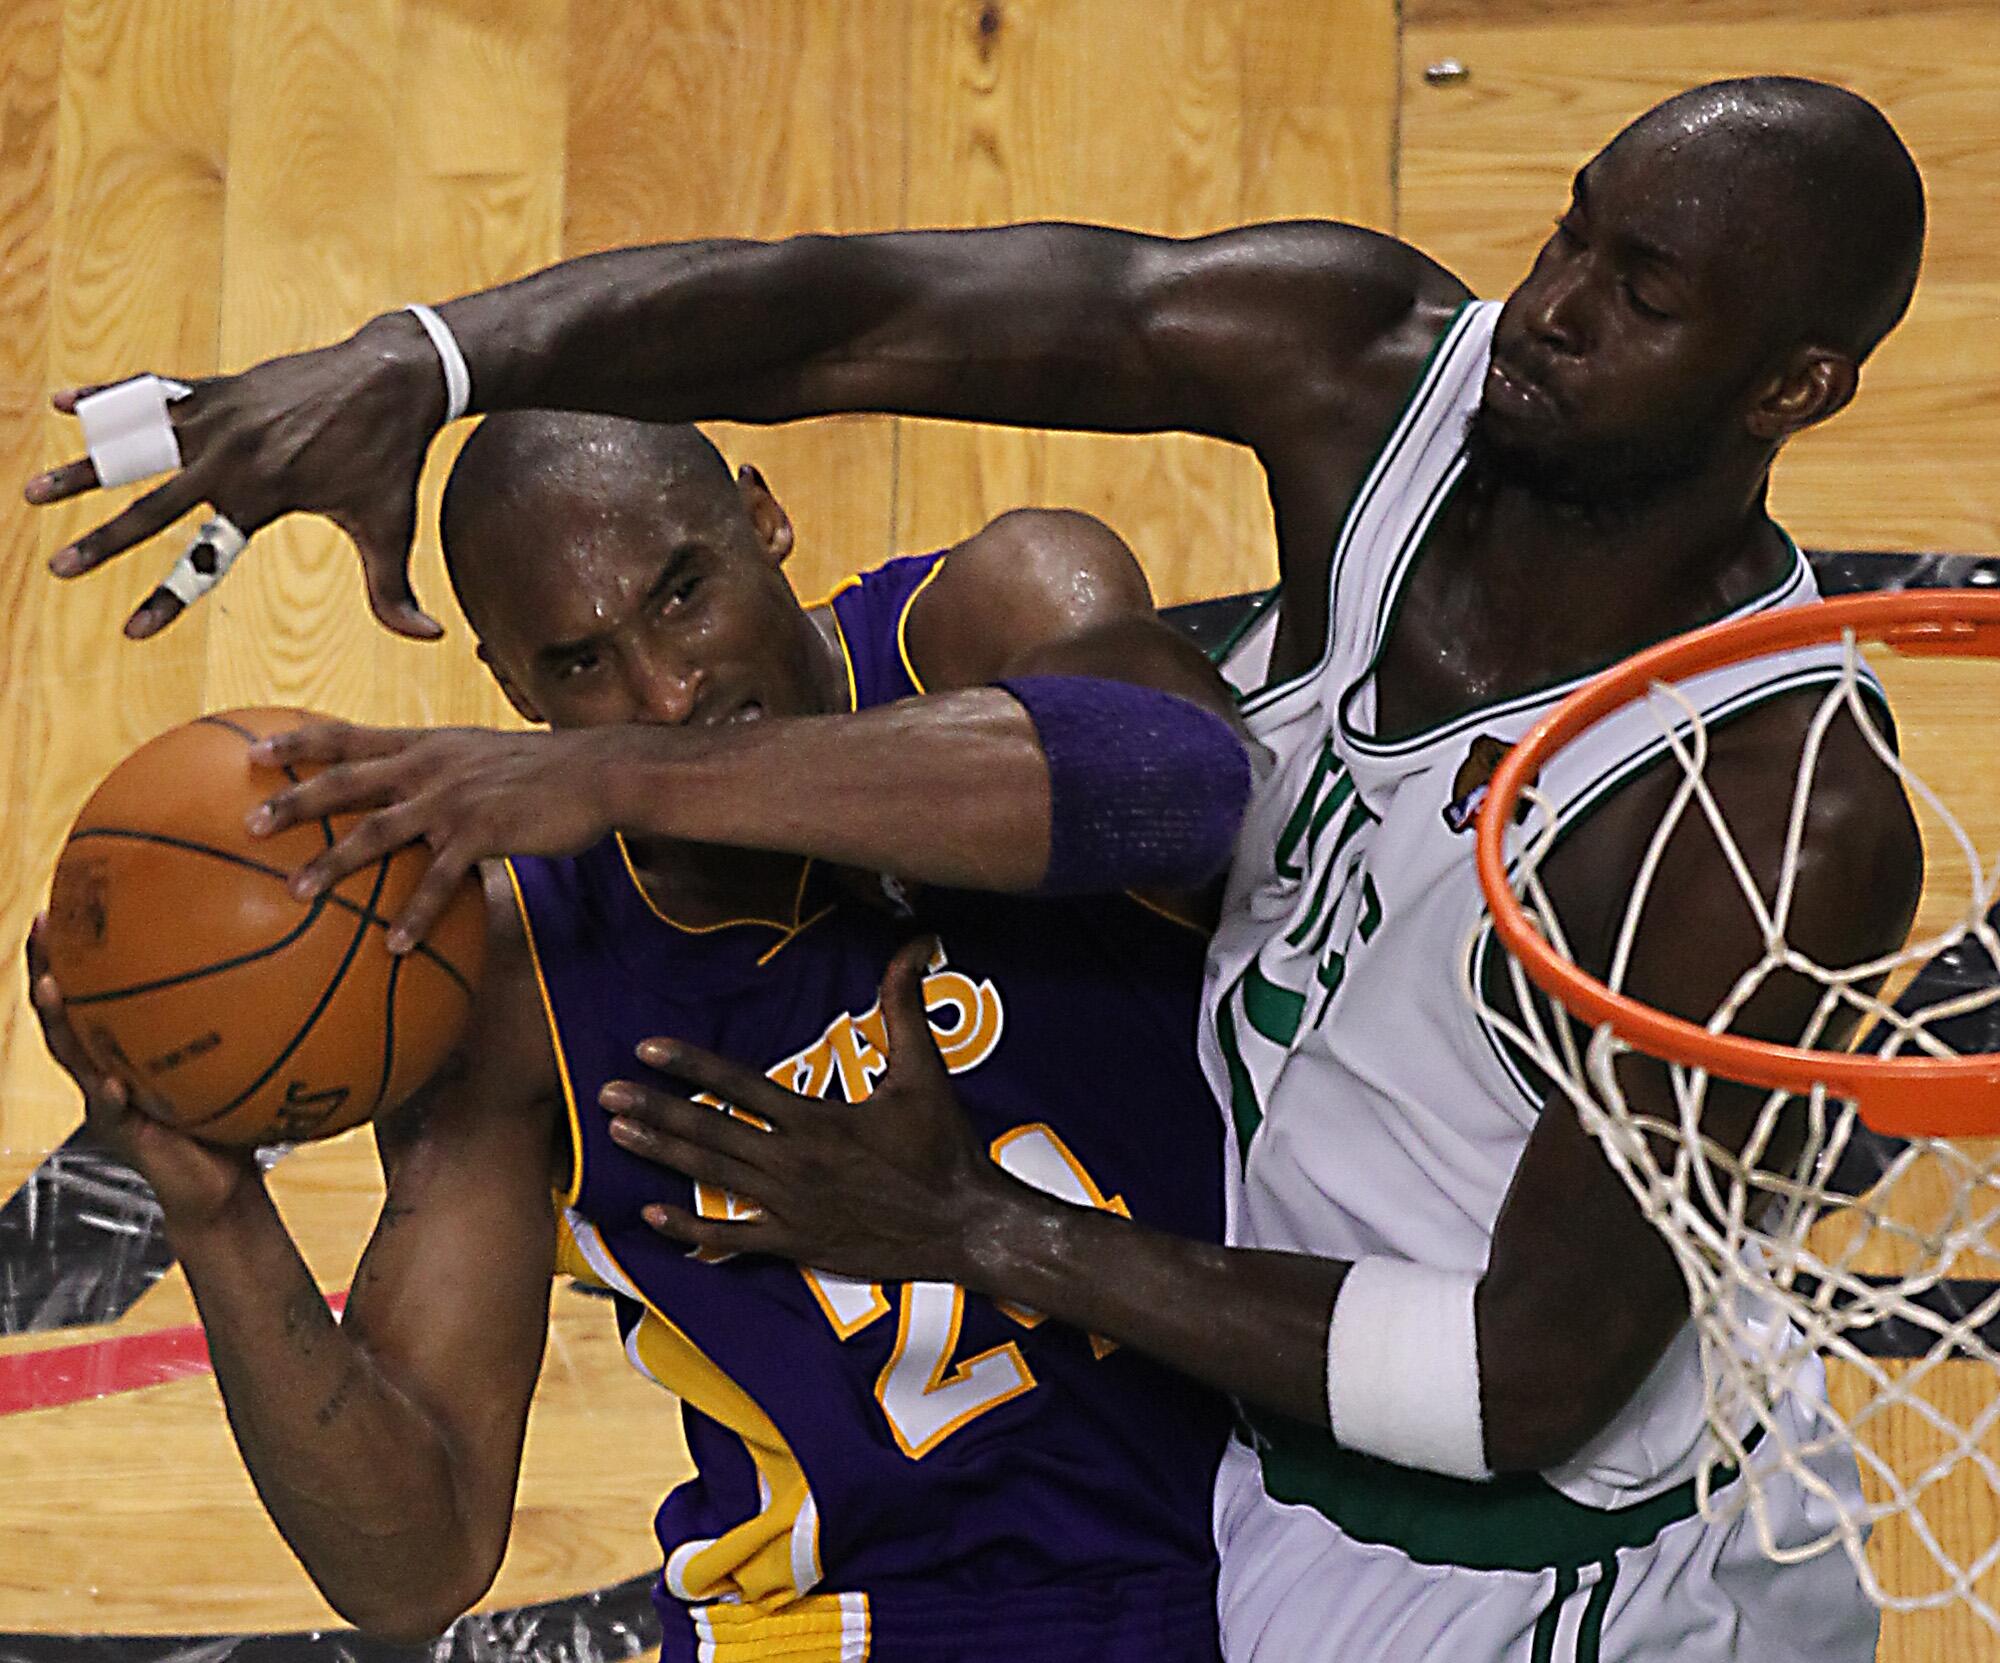 Lakers star Kobe Bryant has his layup challenged by fellow Hall of Famer Kevin Garnett during a game against the Celtics.